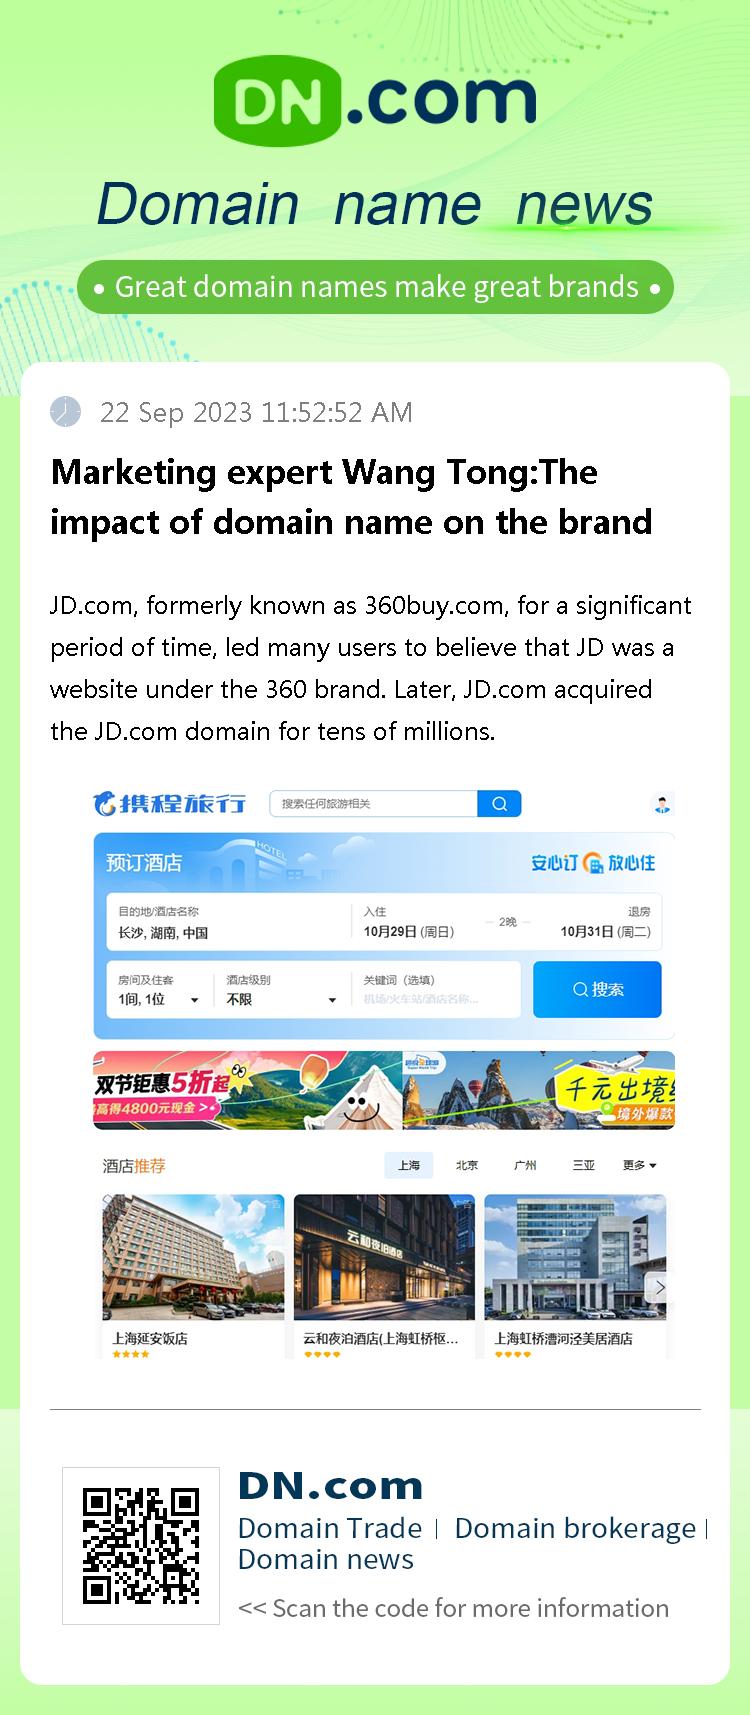 Marketing expert Wang Tong:The impact of domain name on the brand